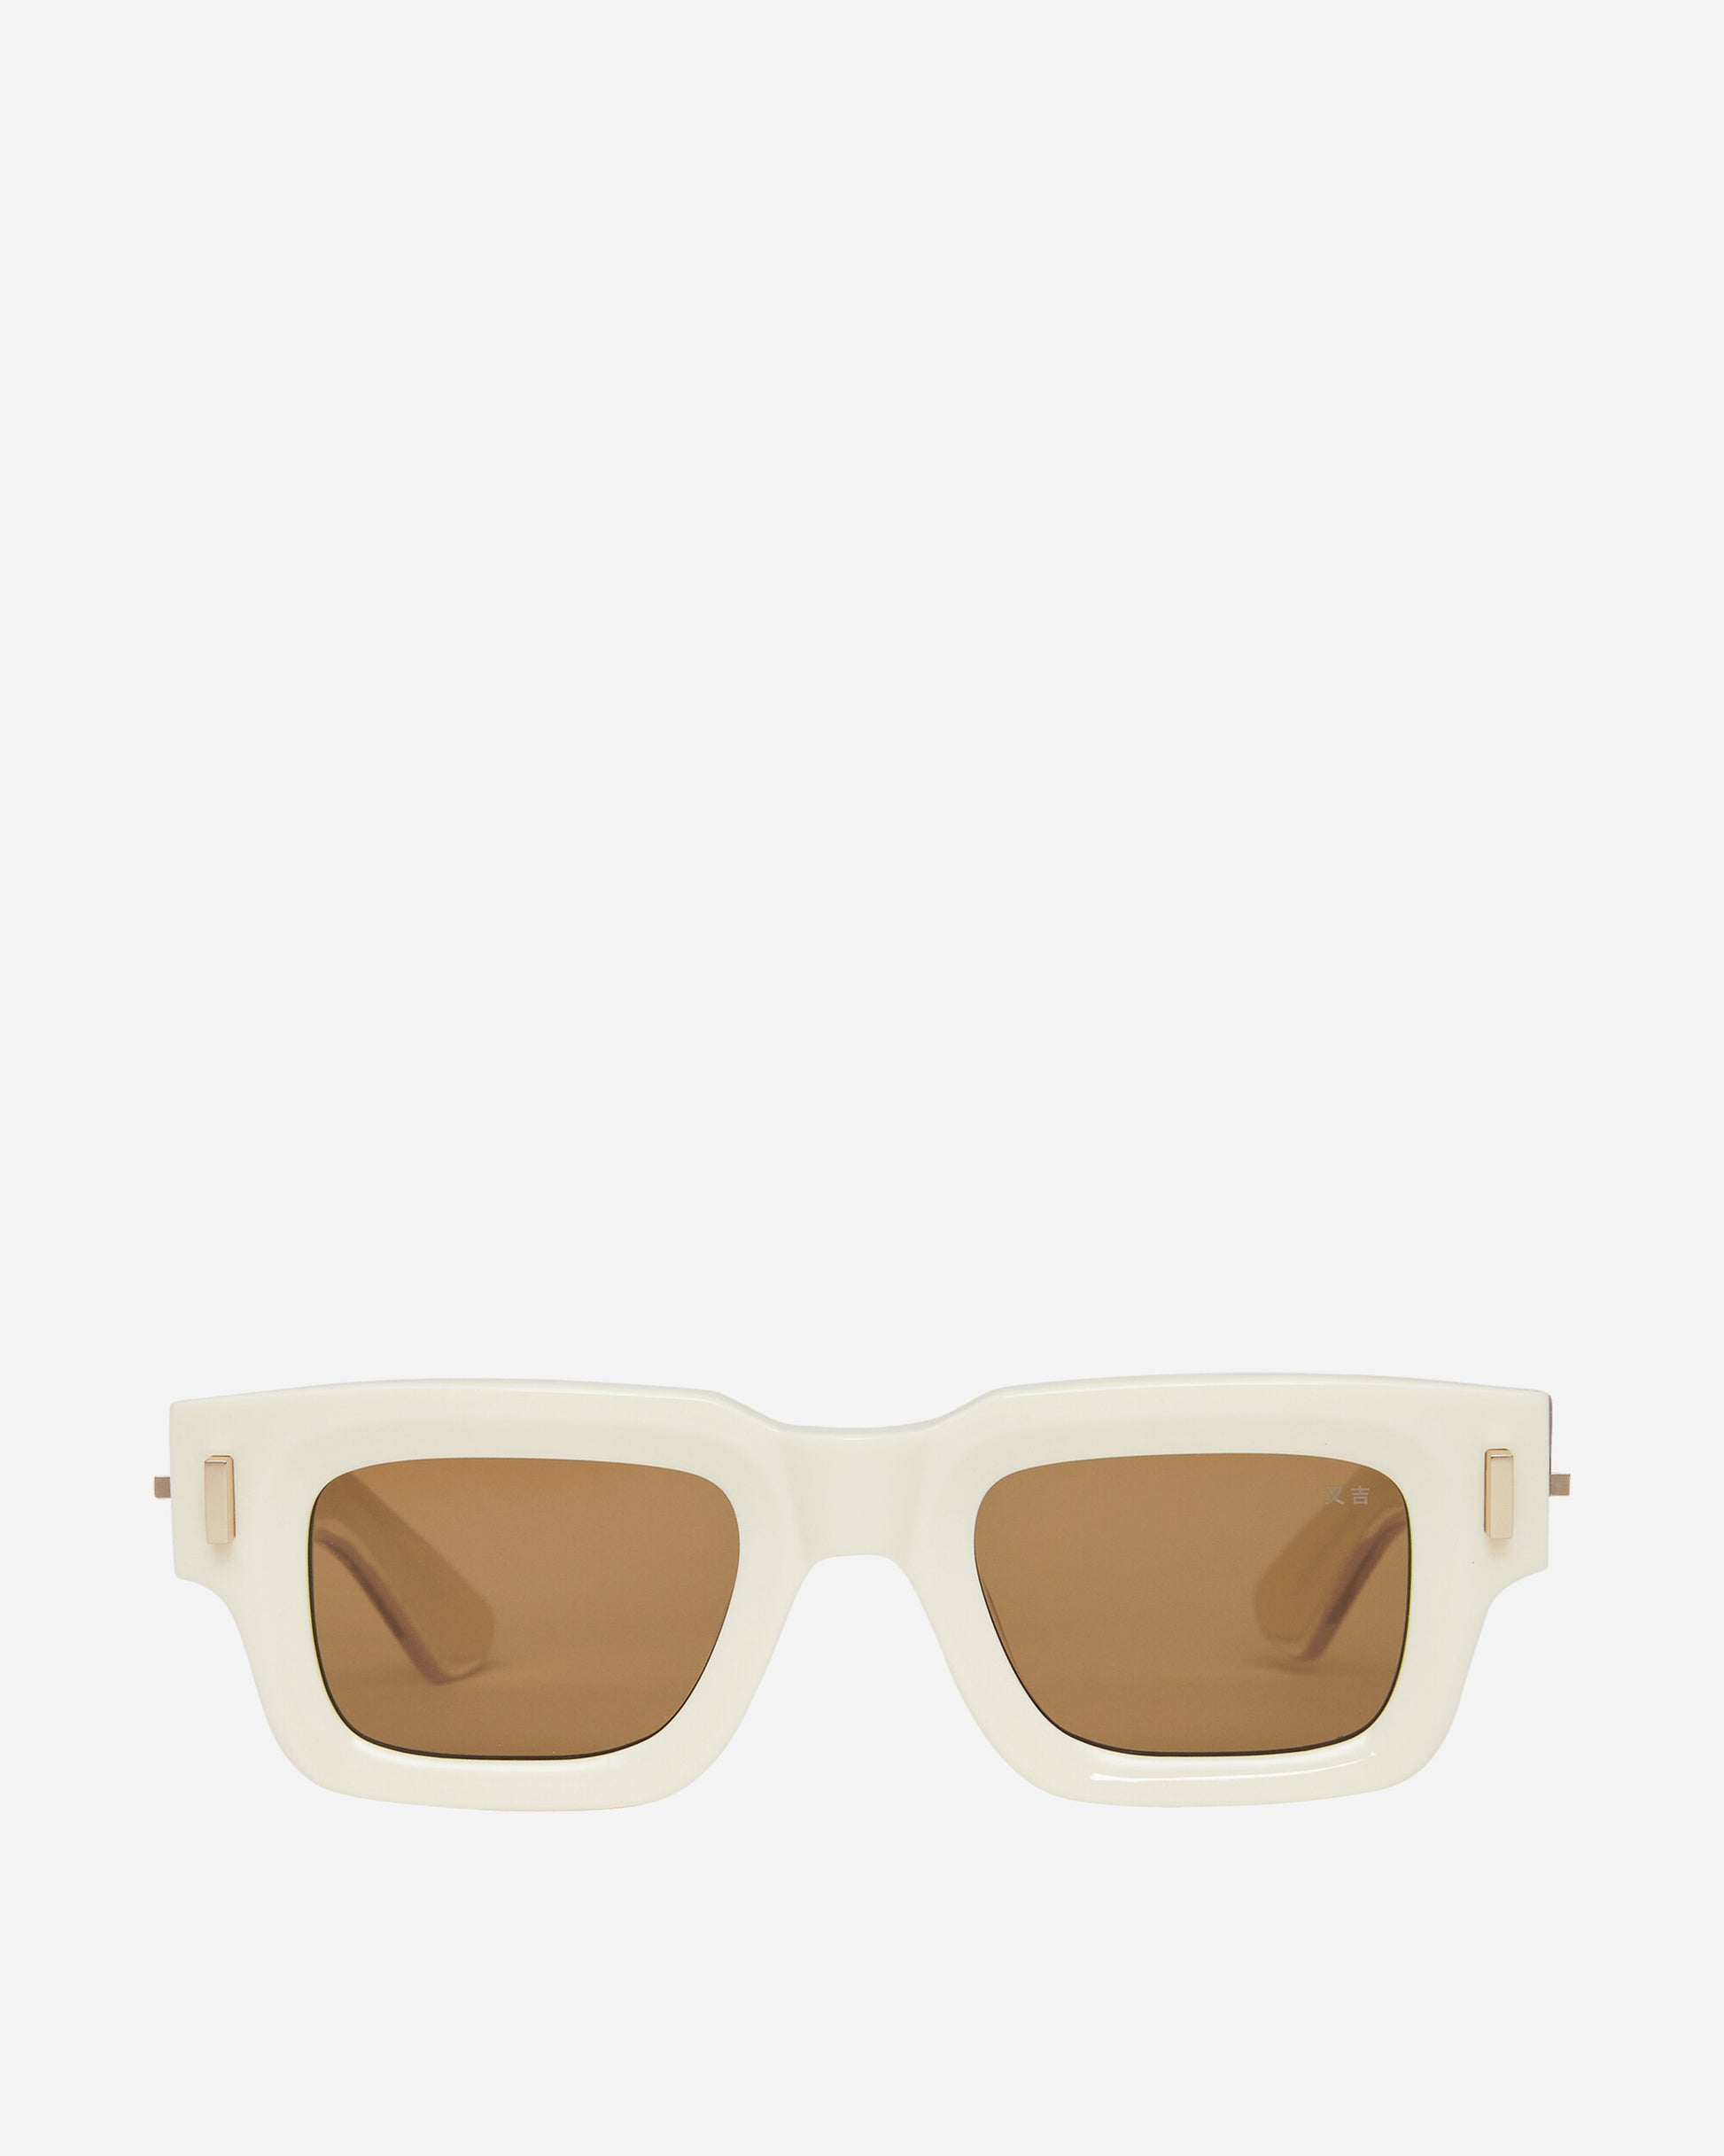 AKILA Ares X Pace Ivory/Brown Eyewear Sunglasses 212569 65P